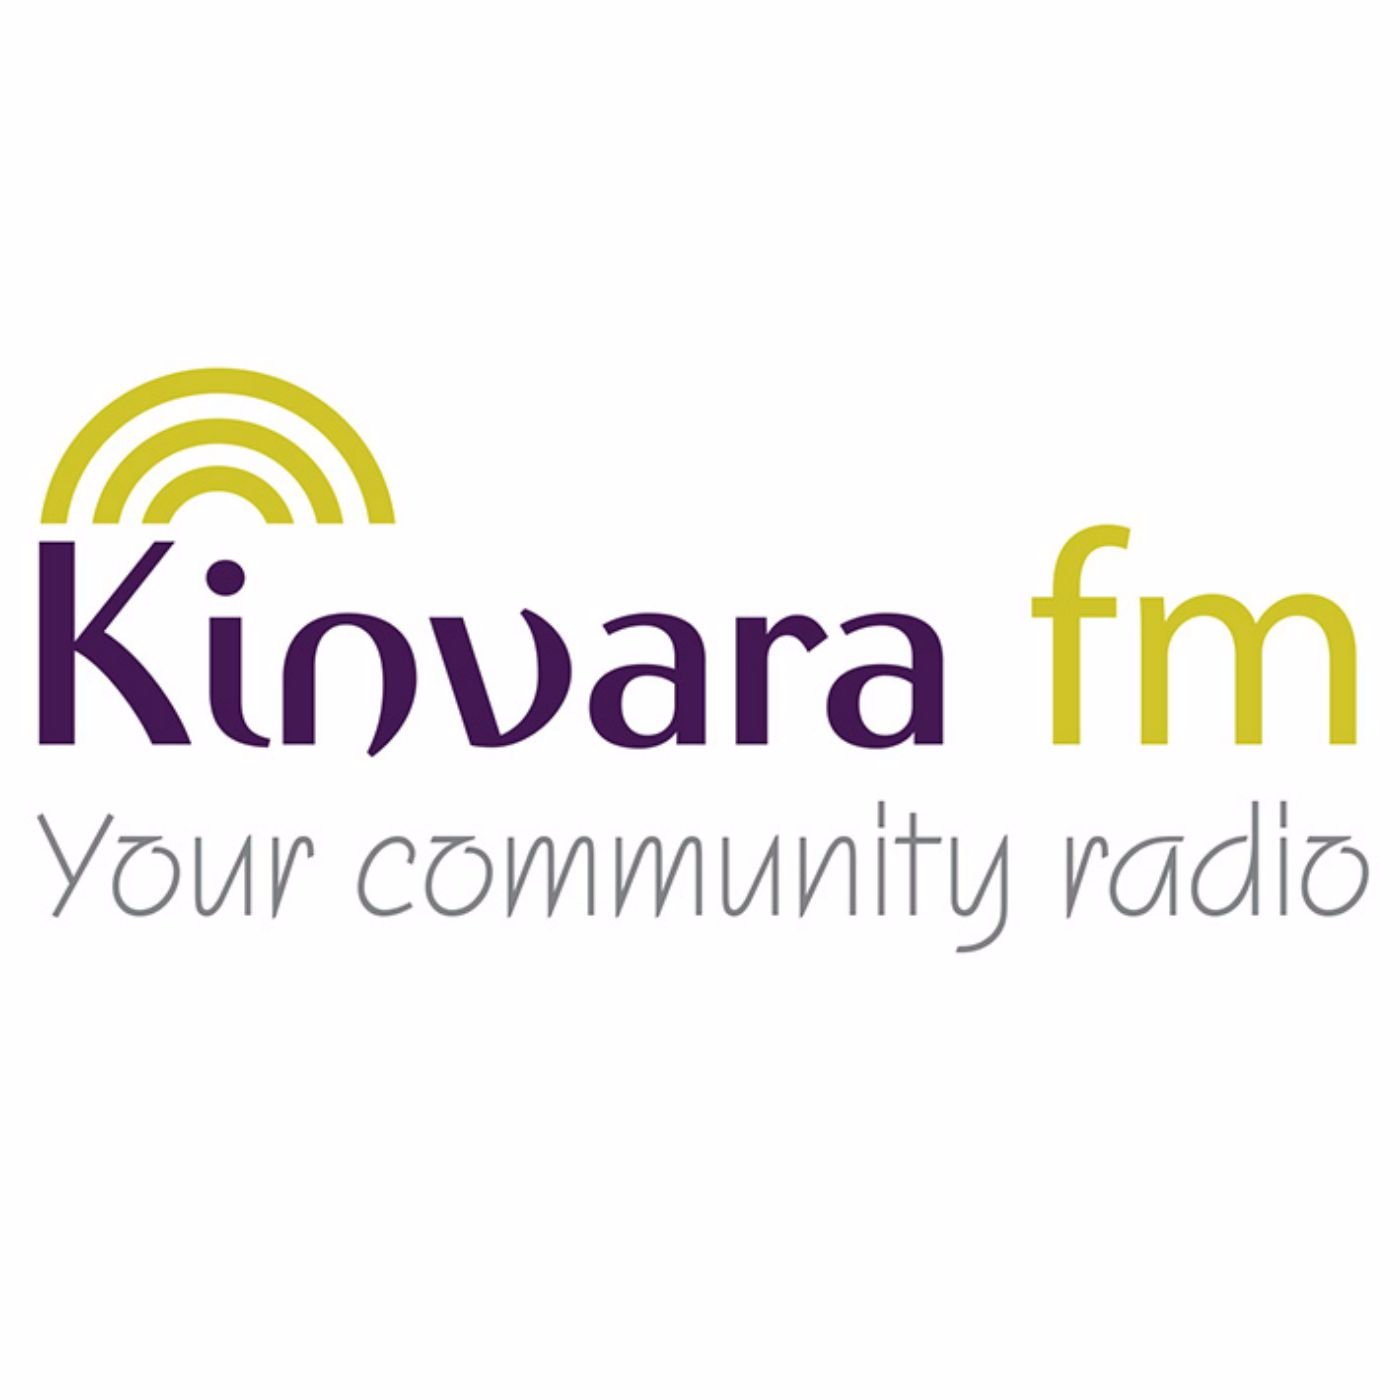 Kinvara Community Radio 92.4 fm is County Galway's all new Community Radio Station at the gateway to the Burren